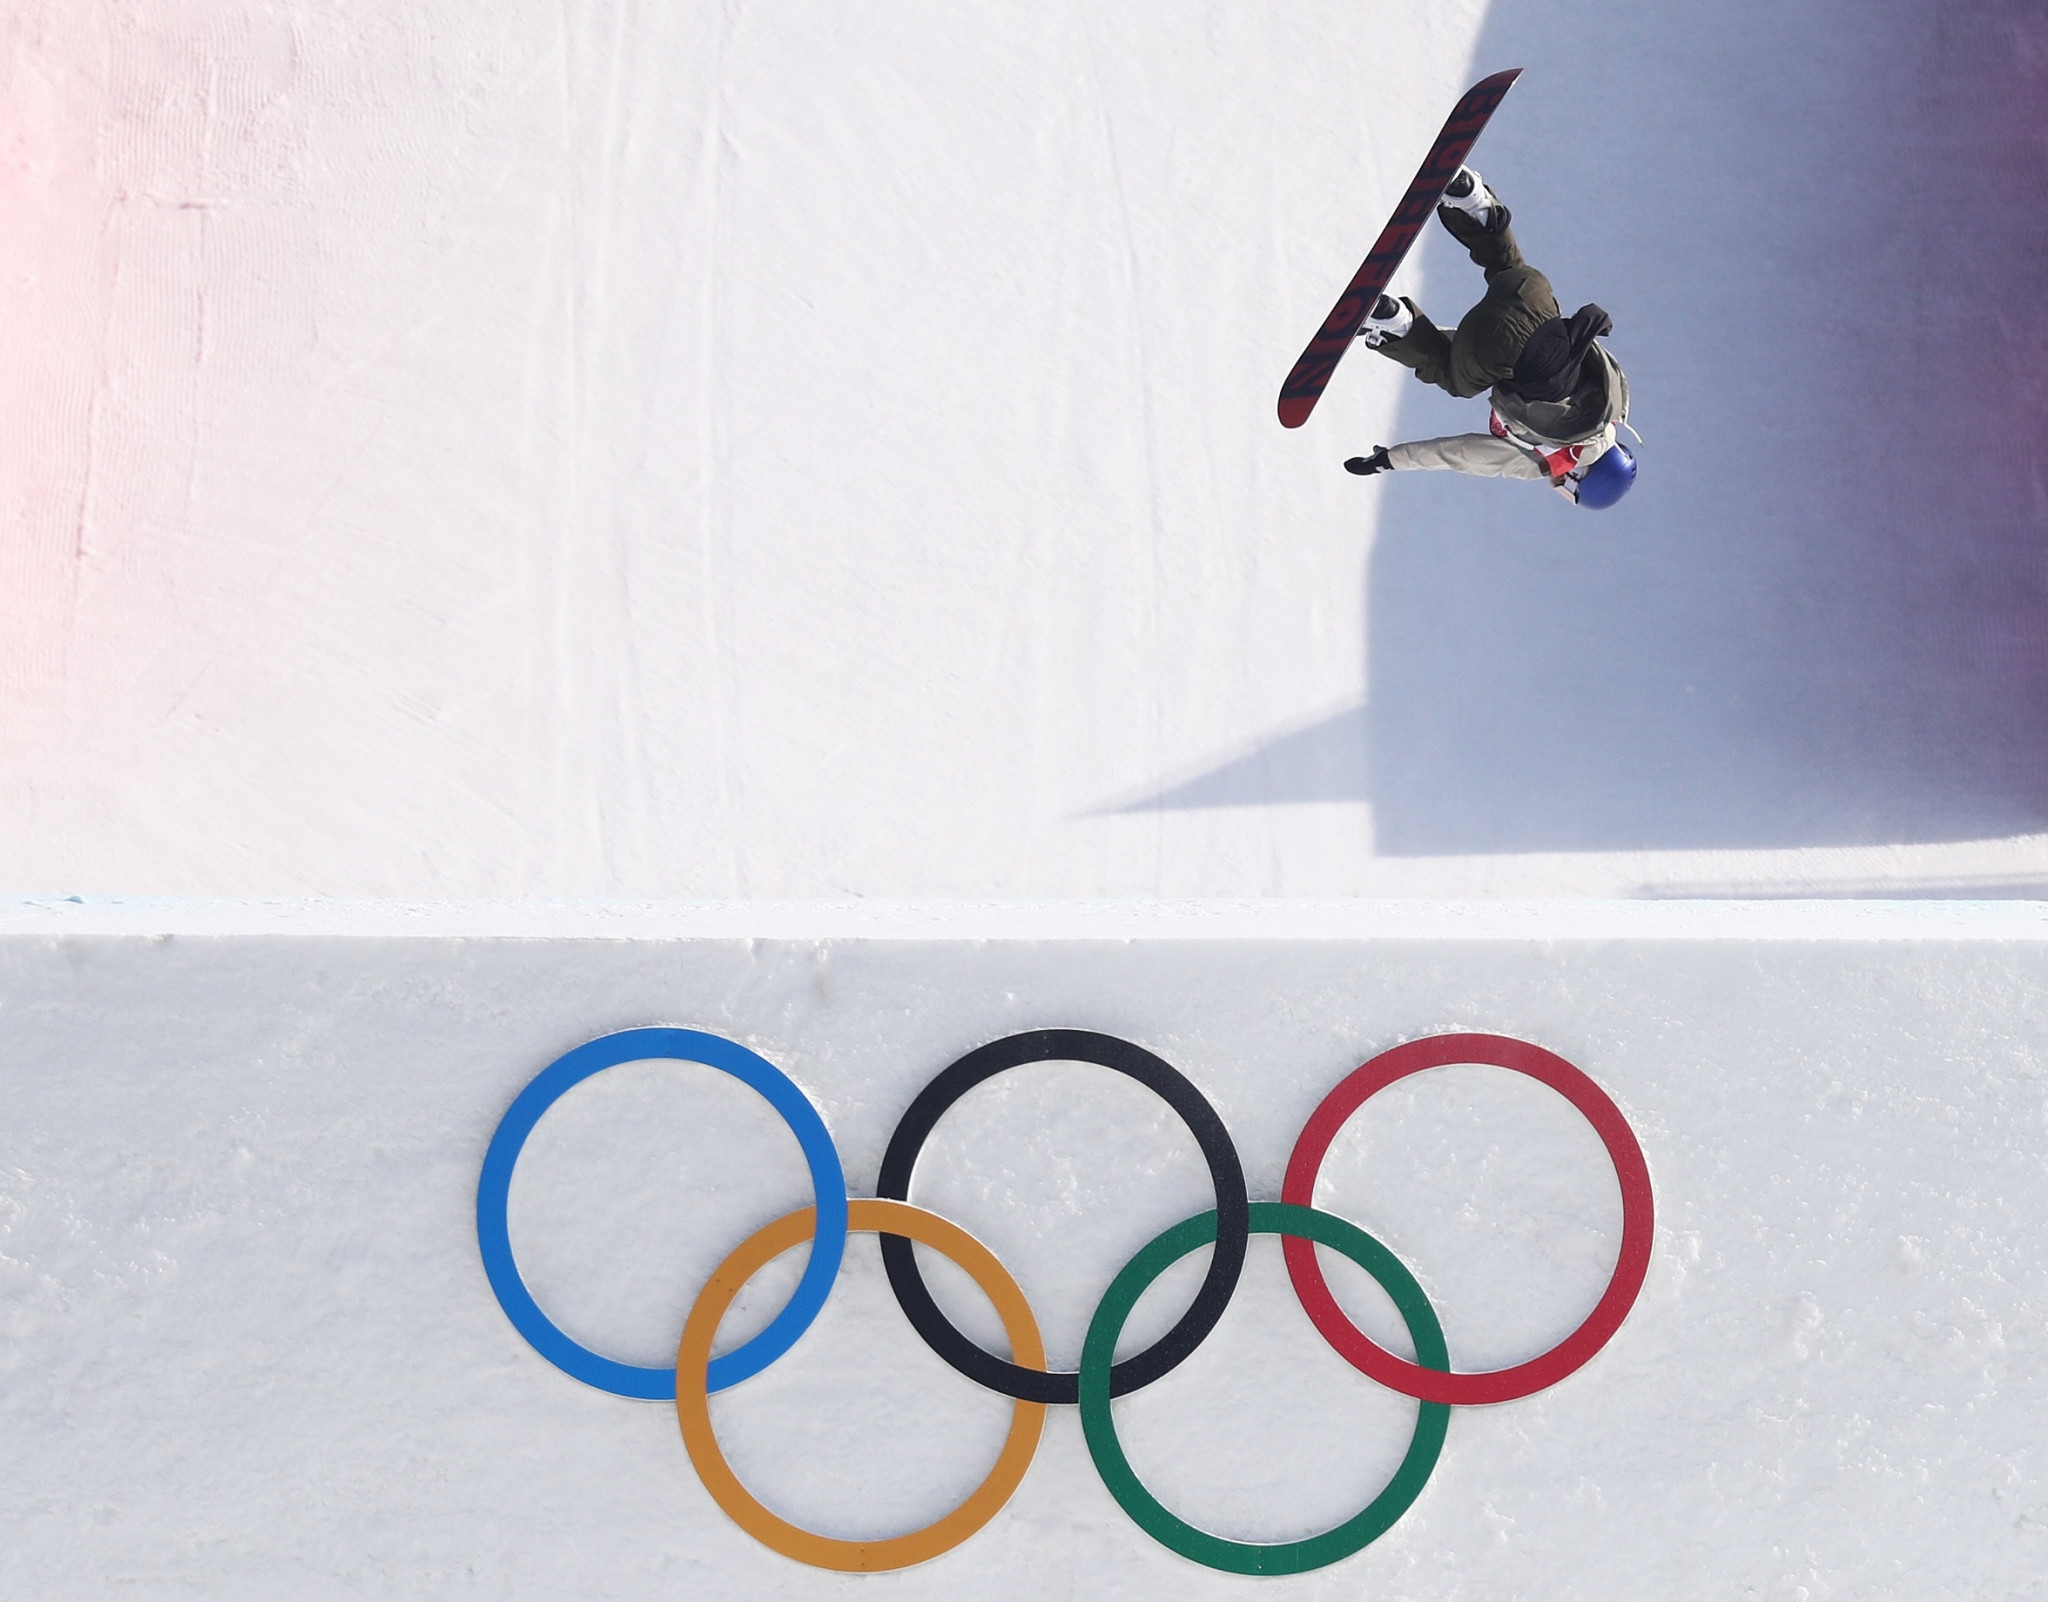 Austria’s Anna Gasser won the first-ever Olympic snowboarding big air gold medal after claiming victory in the women’s event ©Getty Images